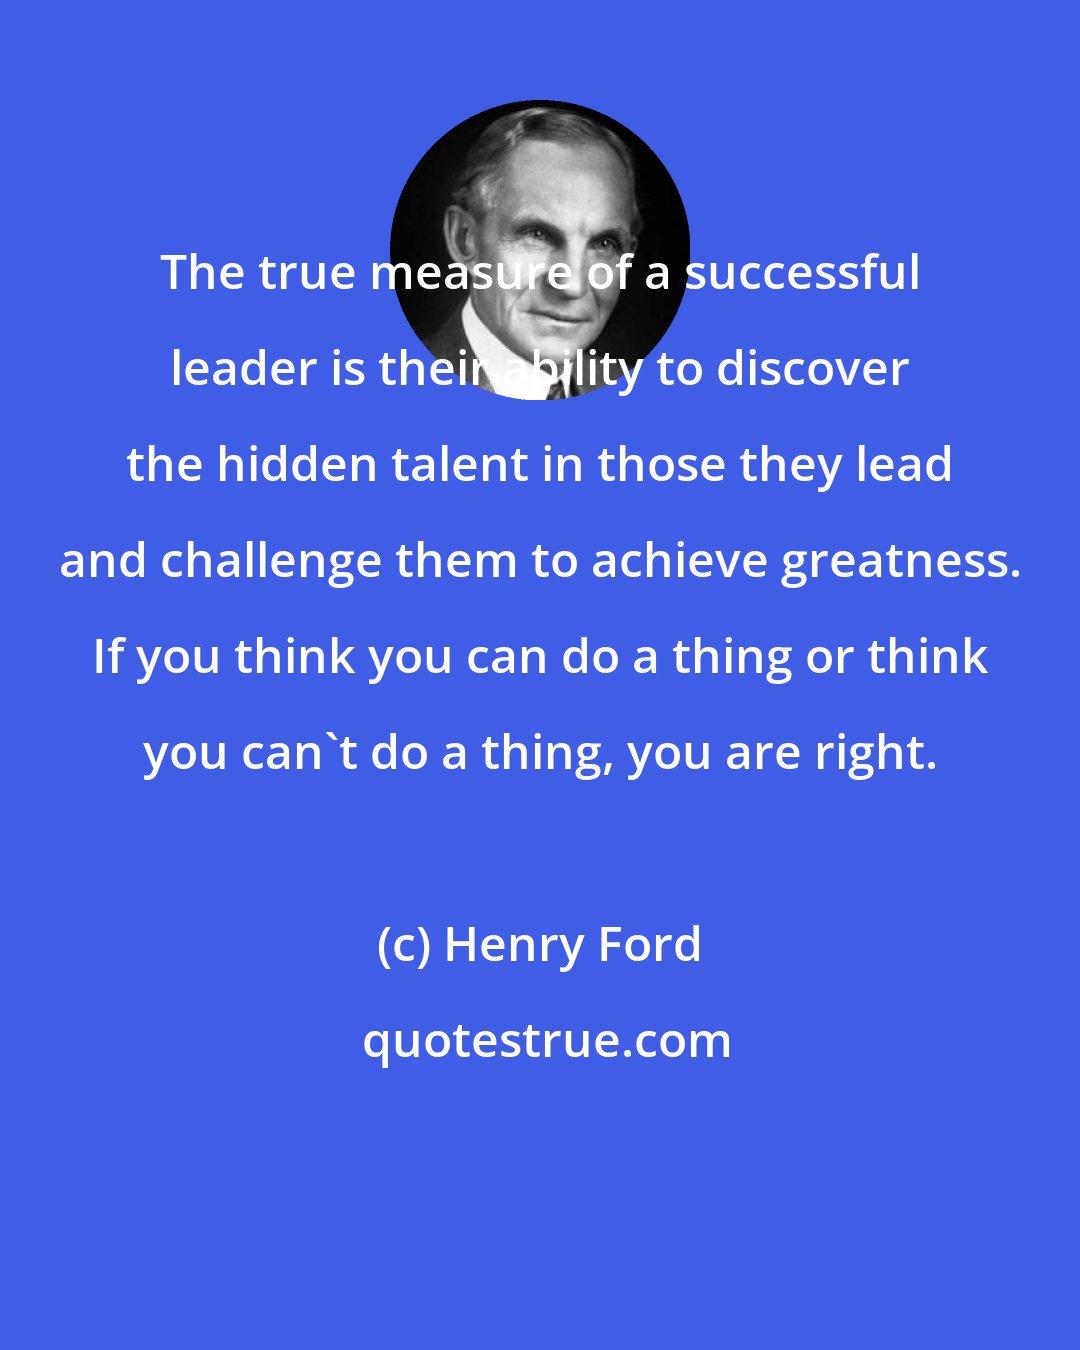 Henry Ford: The true measure of a successful leader is their ability to discover the hidden talent in those they lead and challenge them to achieve greatness. If you think you can do a thing or think you can't do a thing, you are right.